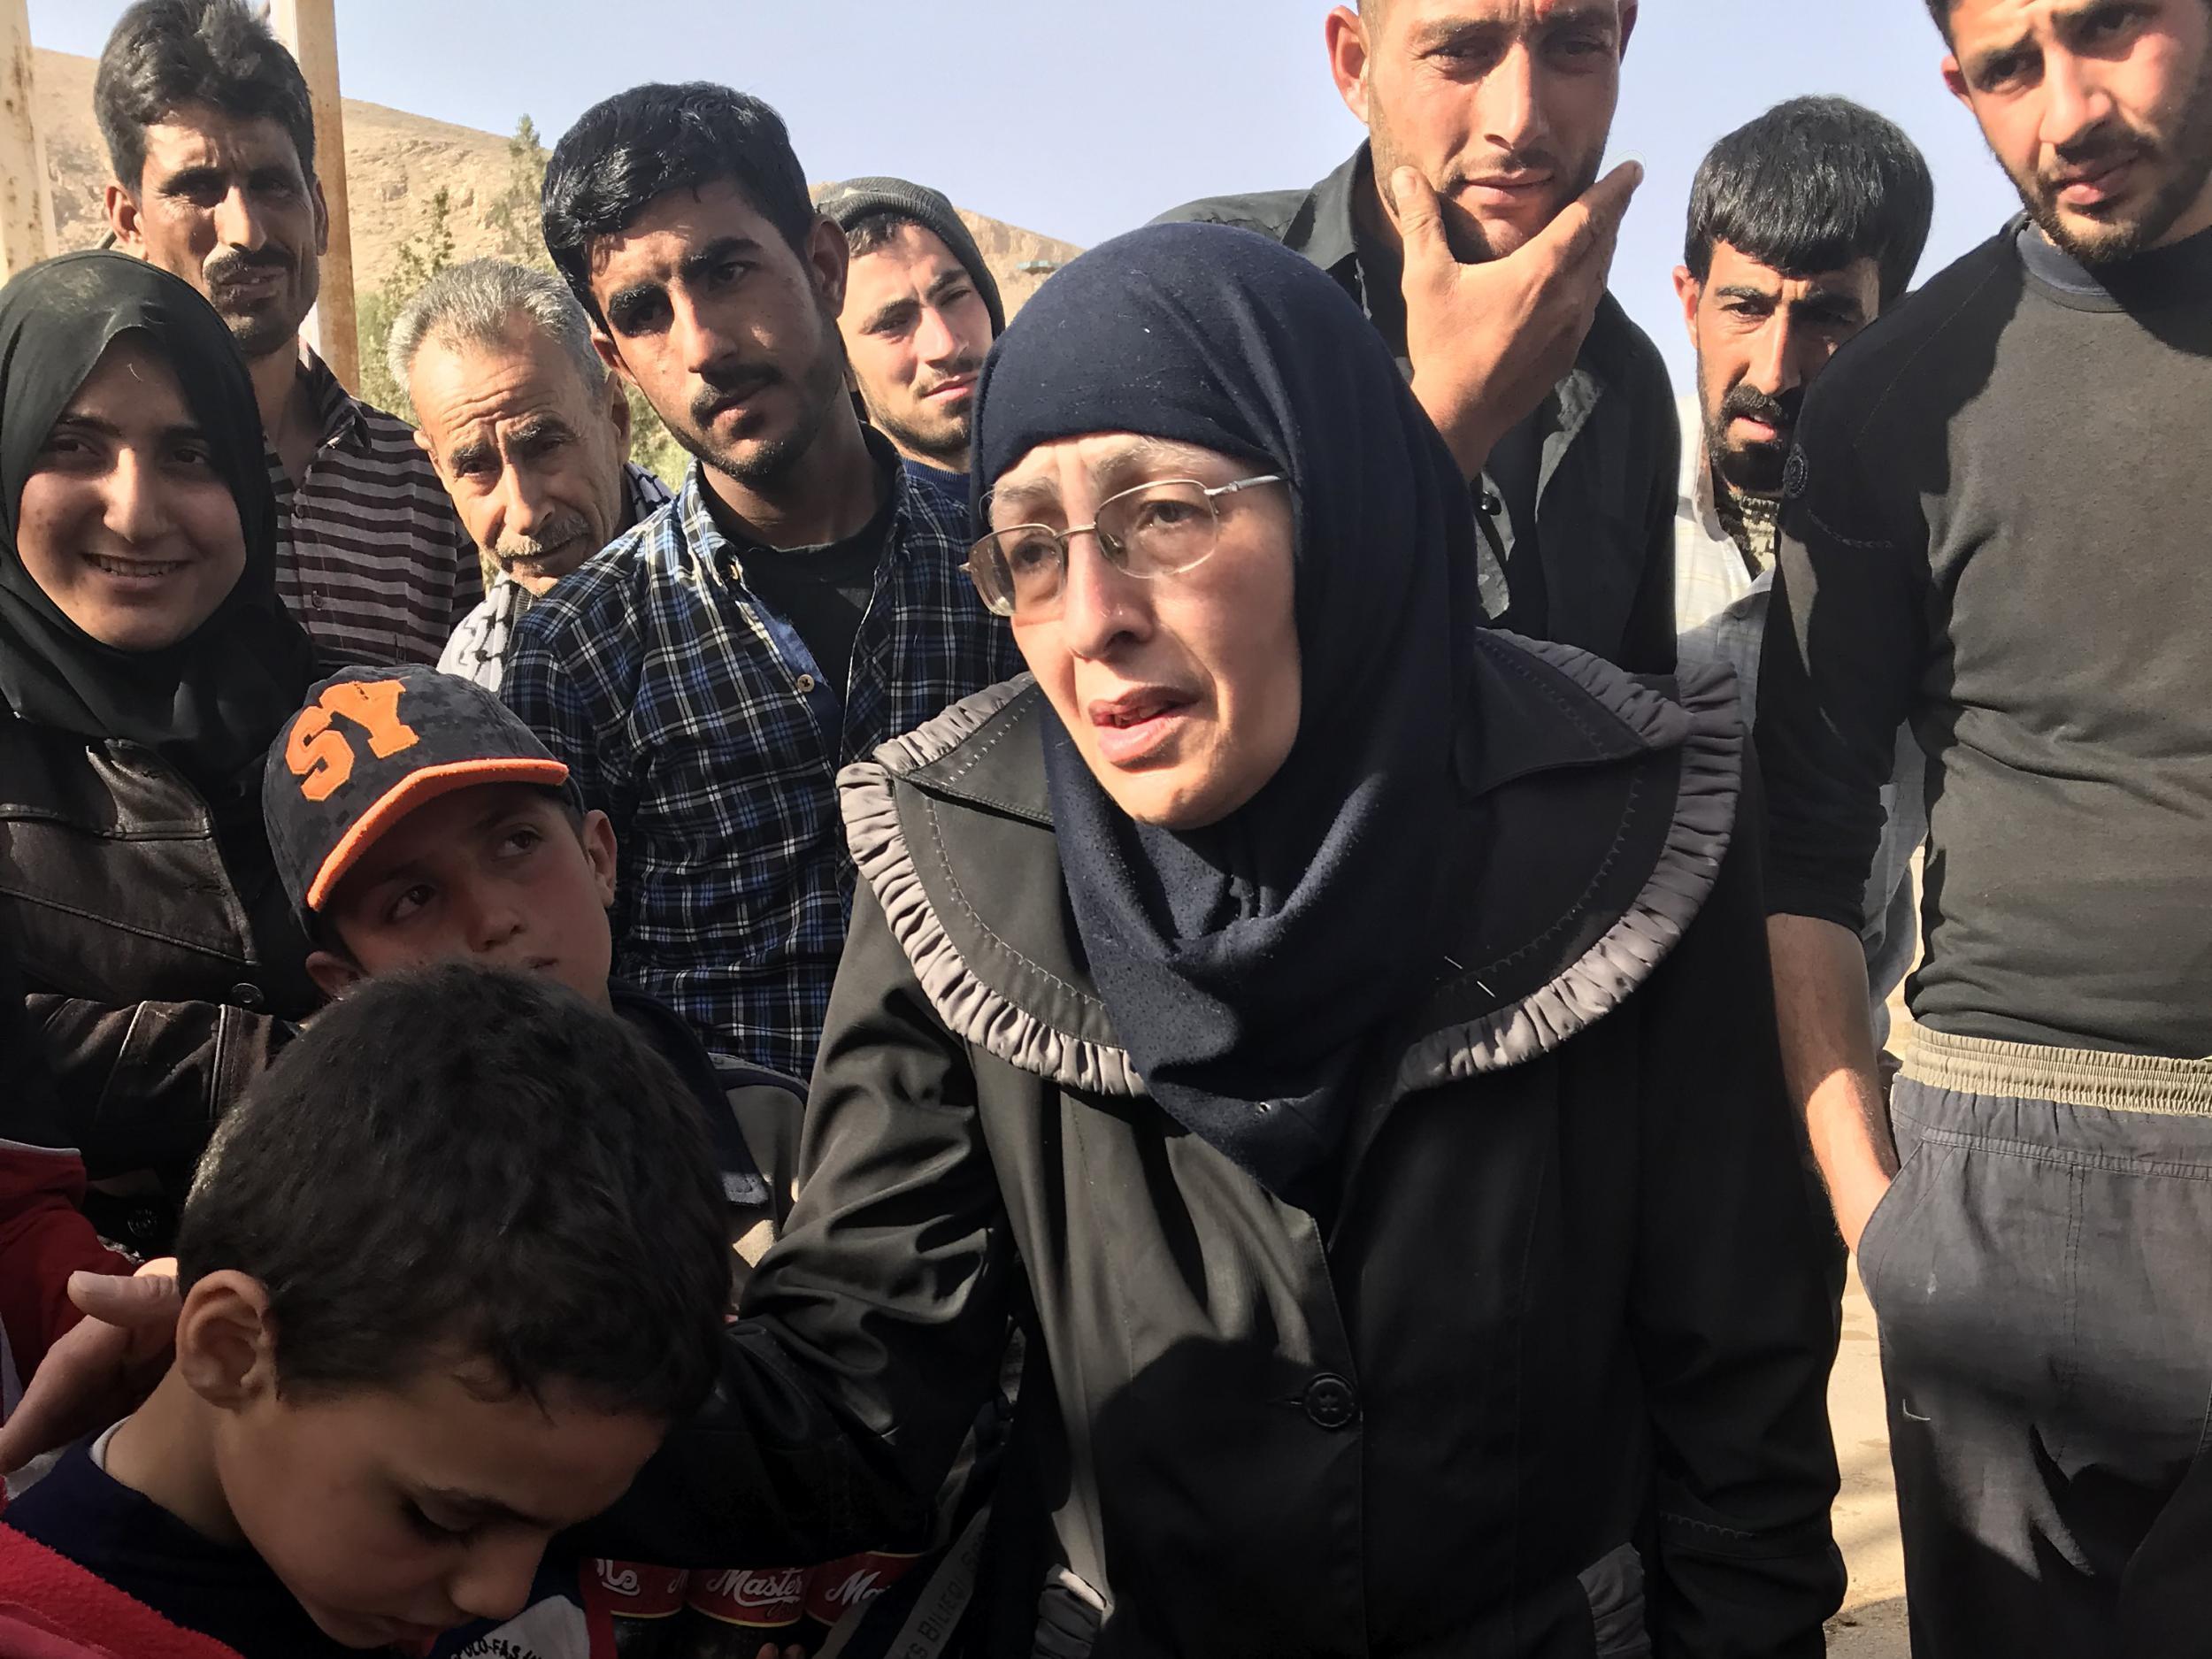 Sana el-Boukeri in a Syrian refugee camp. She lost her civilian husband and son in the Syrian and Russian bombardment of eastern Ghouta while her other son was wounded fighting in the Syrian government army on the other side of the front line